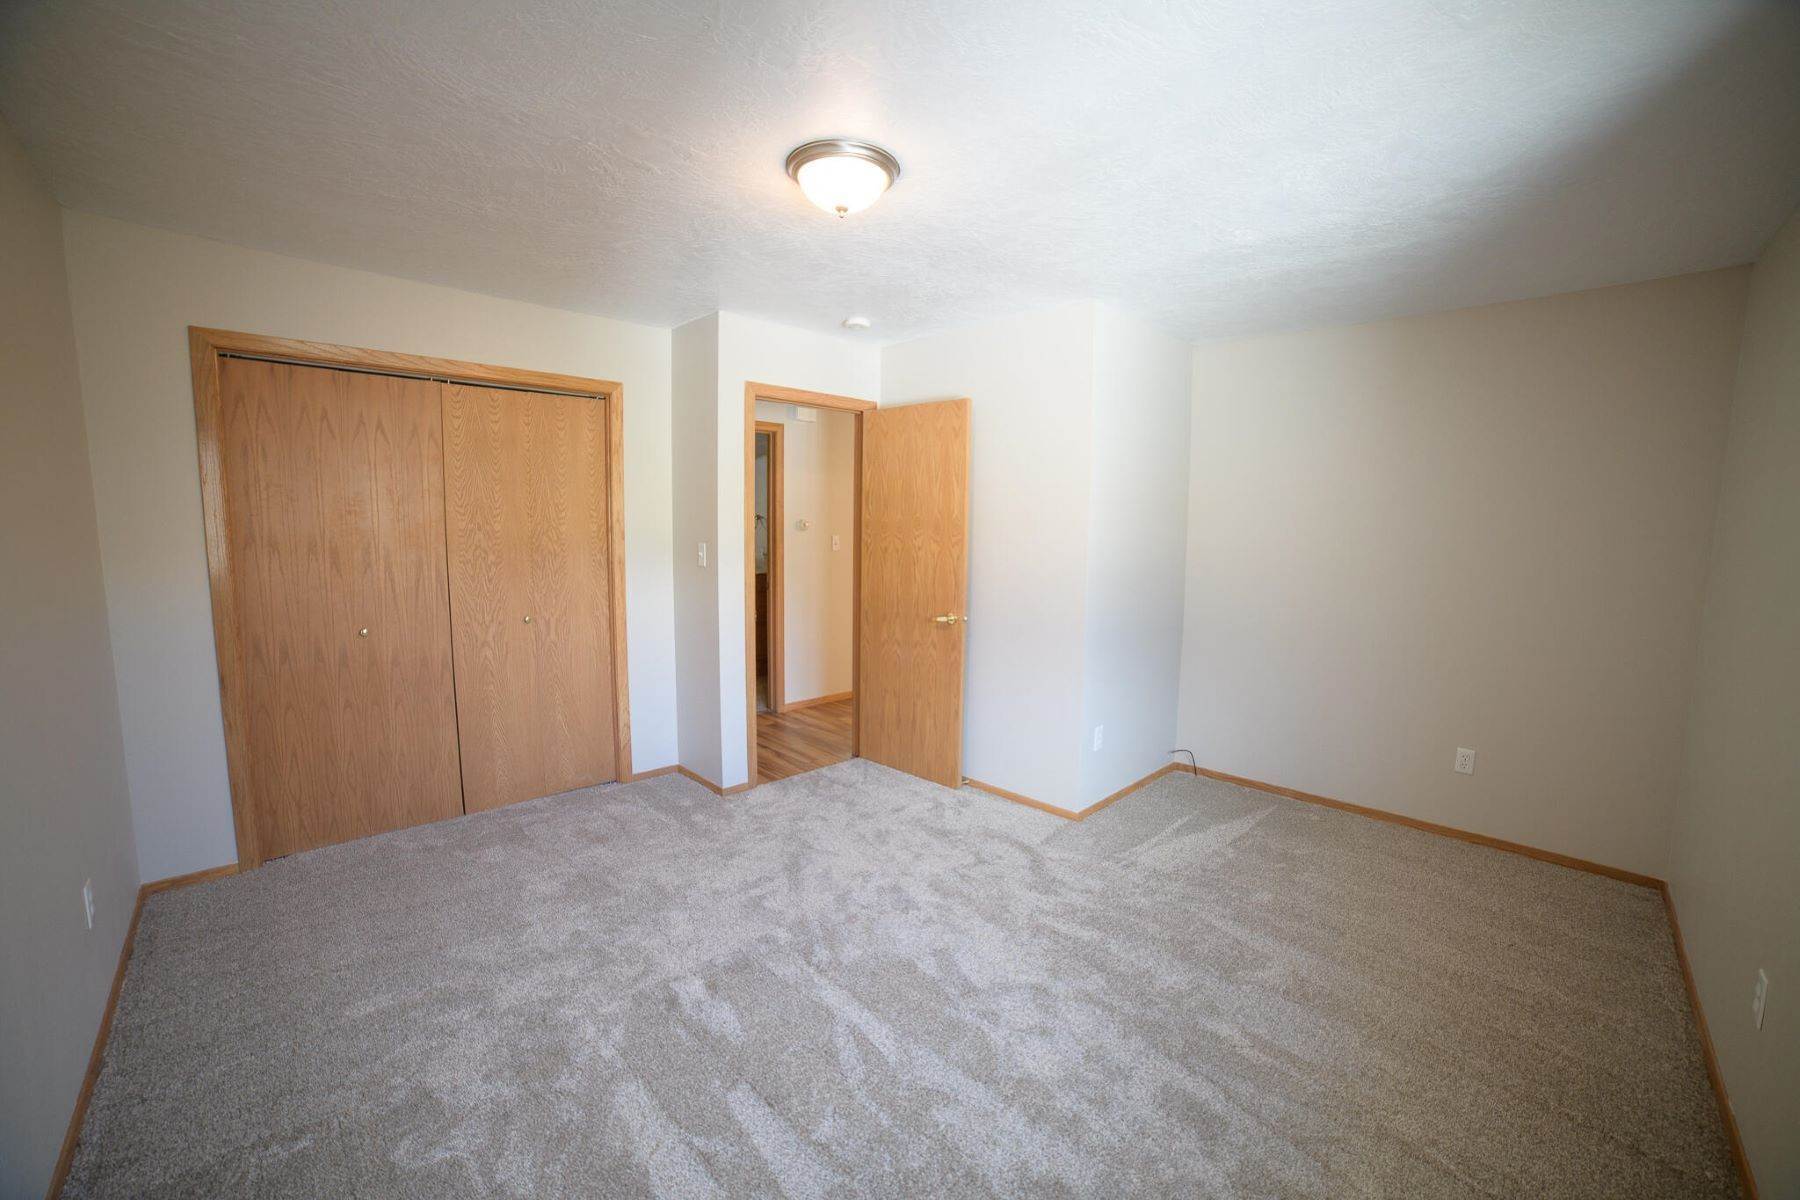 21. Condominiums for Sale at 1916 Belle Vista Drive, Great Falls, Montana 59404 United States